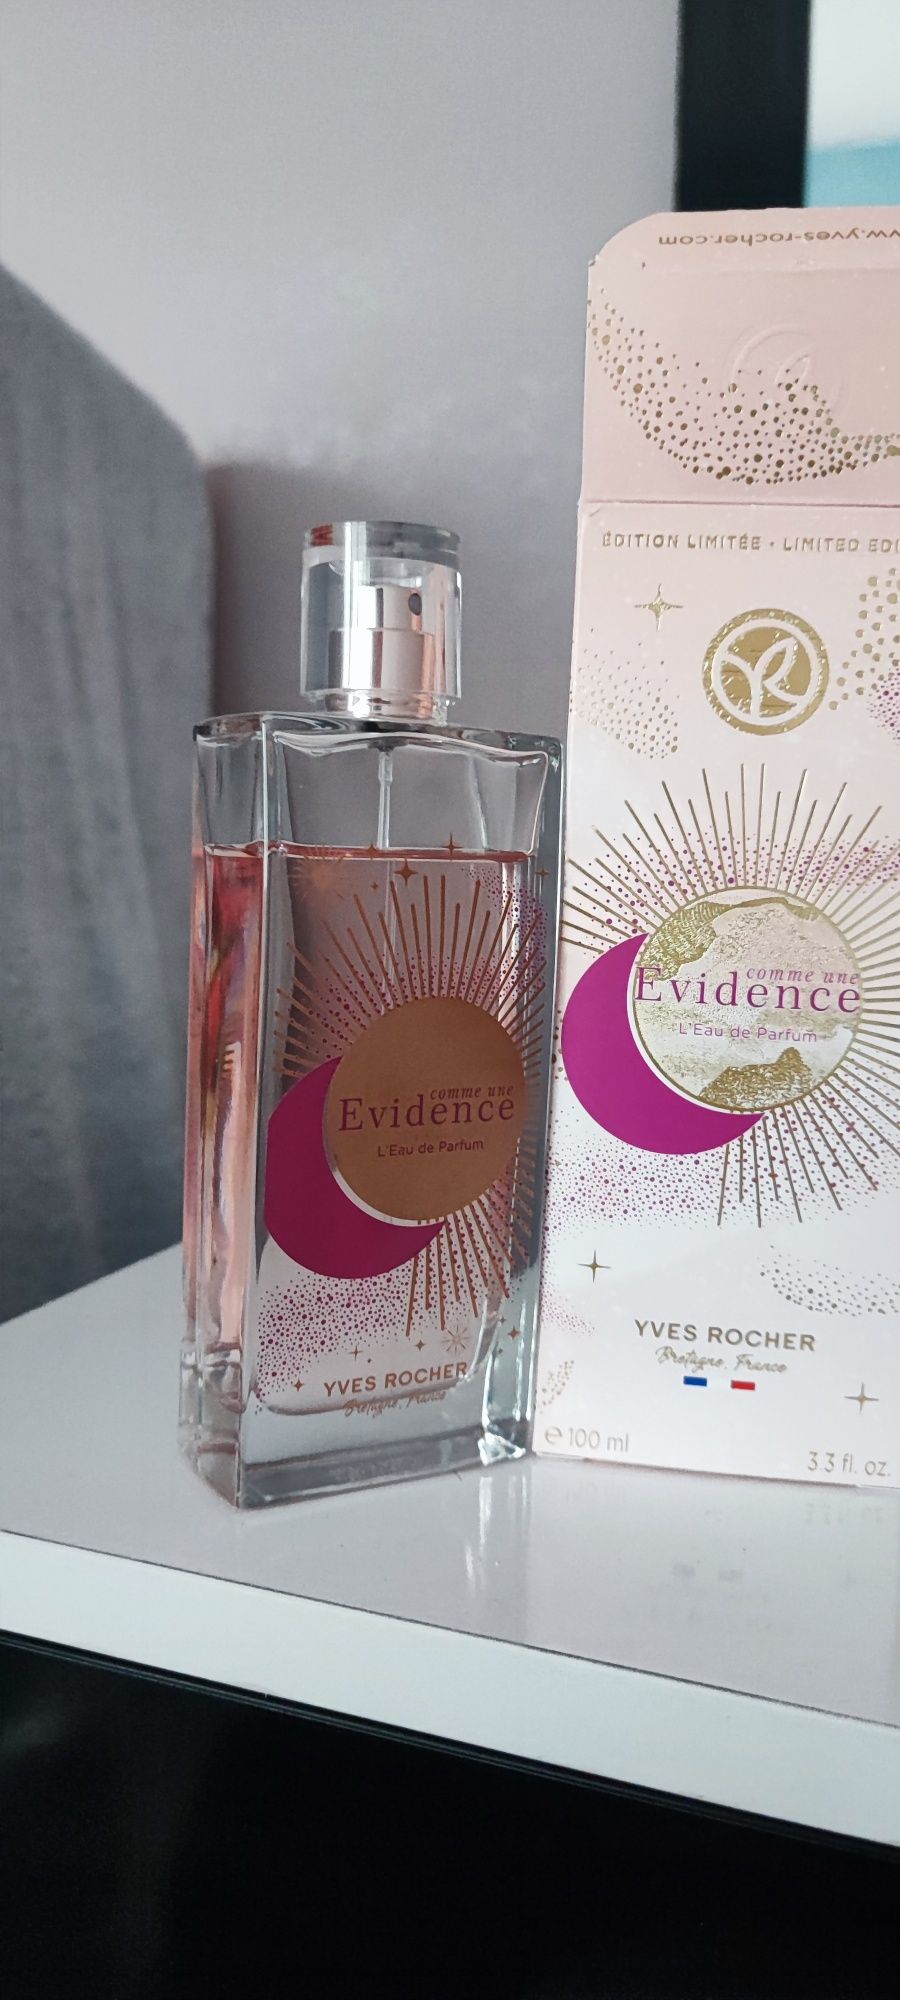 Yves Rocher Comme Une Evidence